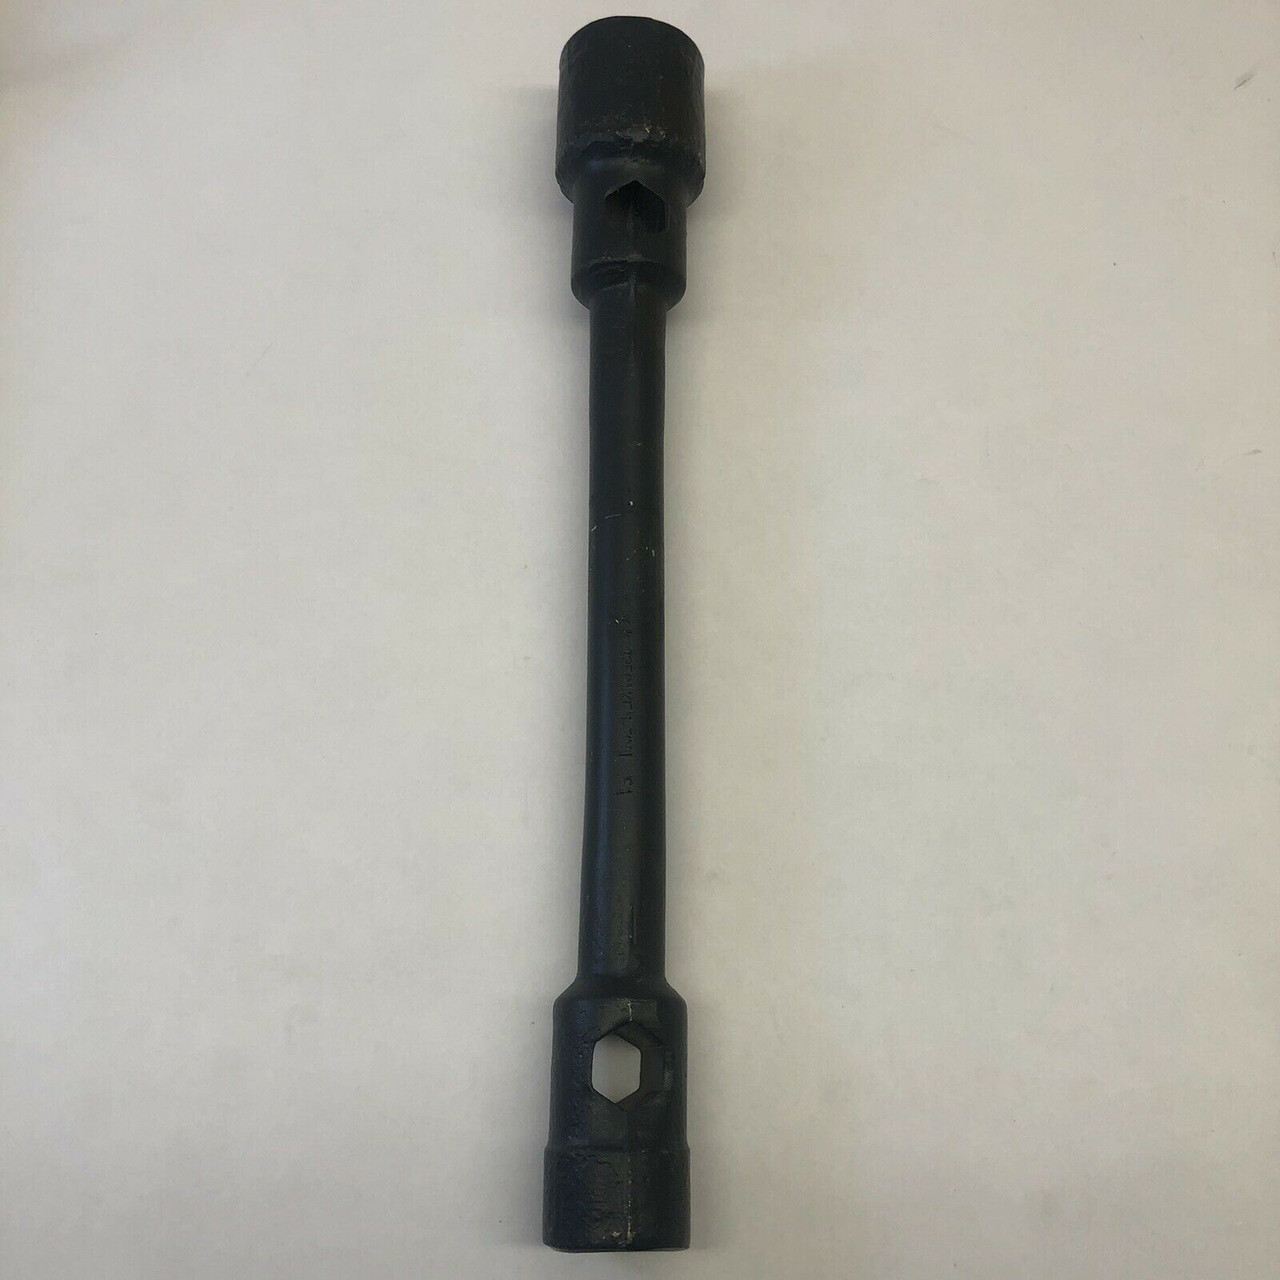 Heil Wrench Tire Manual Control Handle 9378-0041 